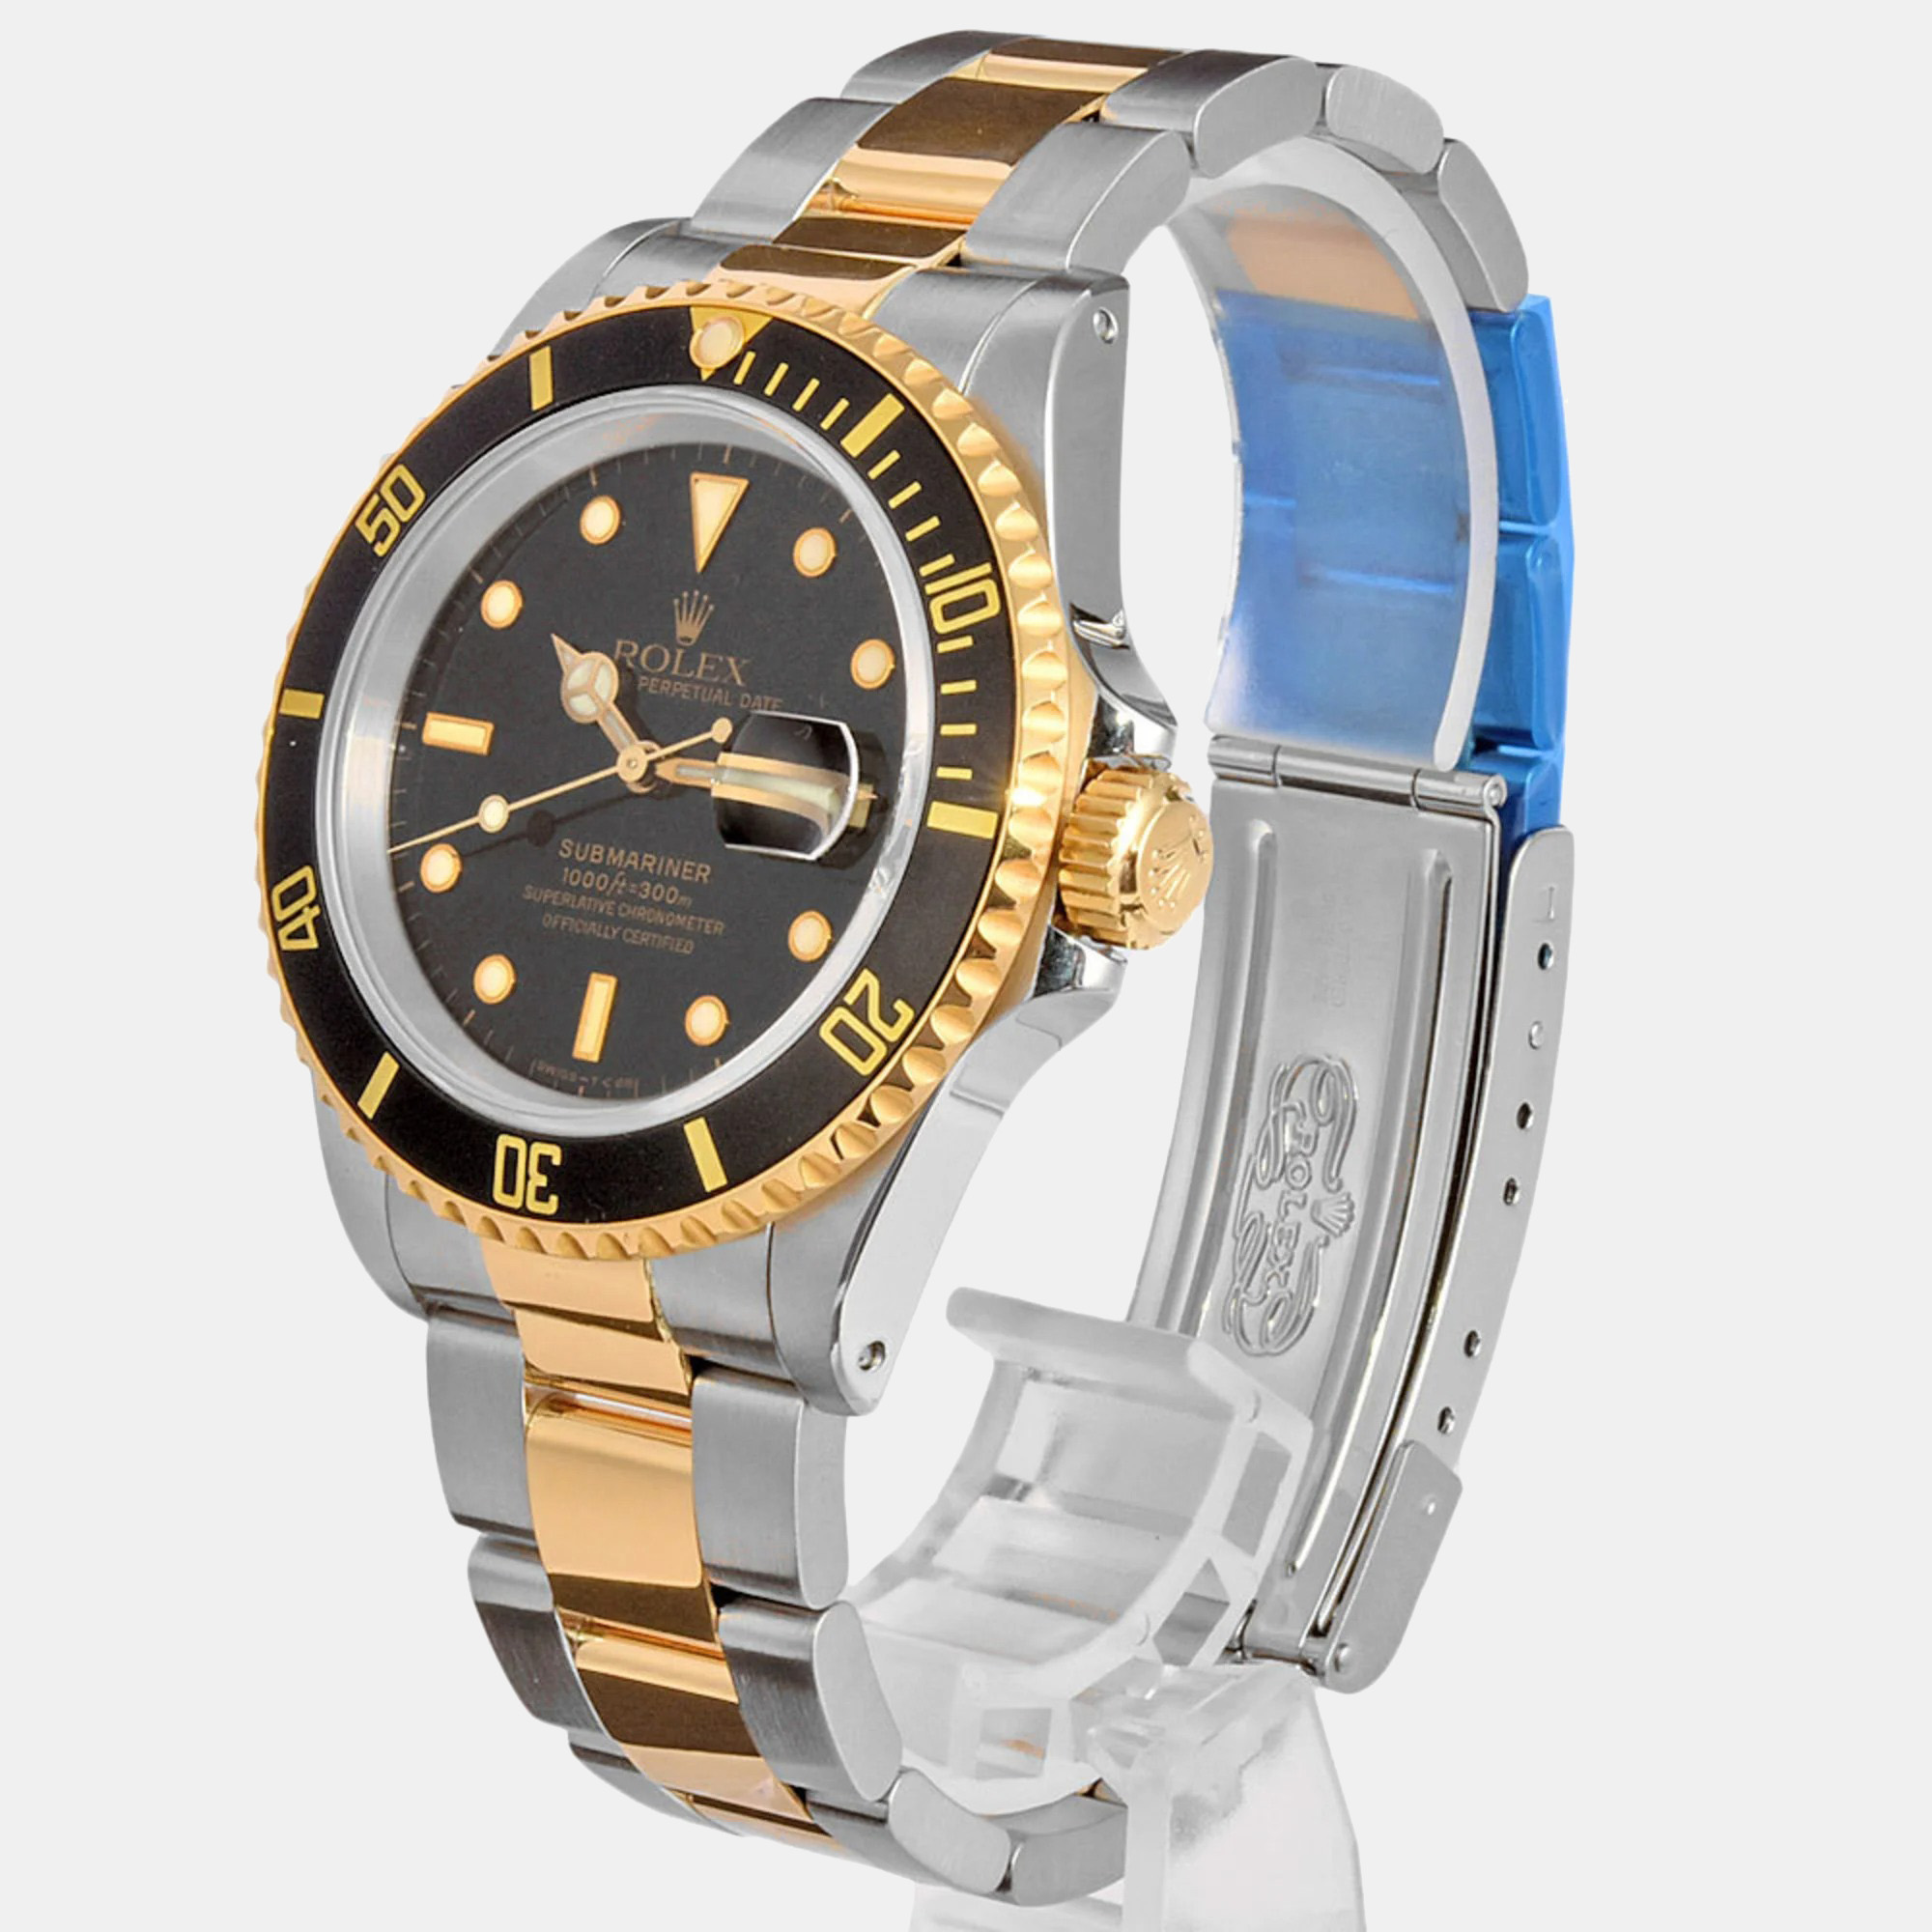 Rolex Black 18k Yellow Gold And Stainless Steel Submariner 16613 Automatic Men's Wristwatch 40 Mm